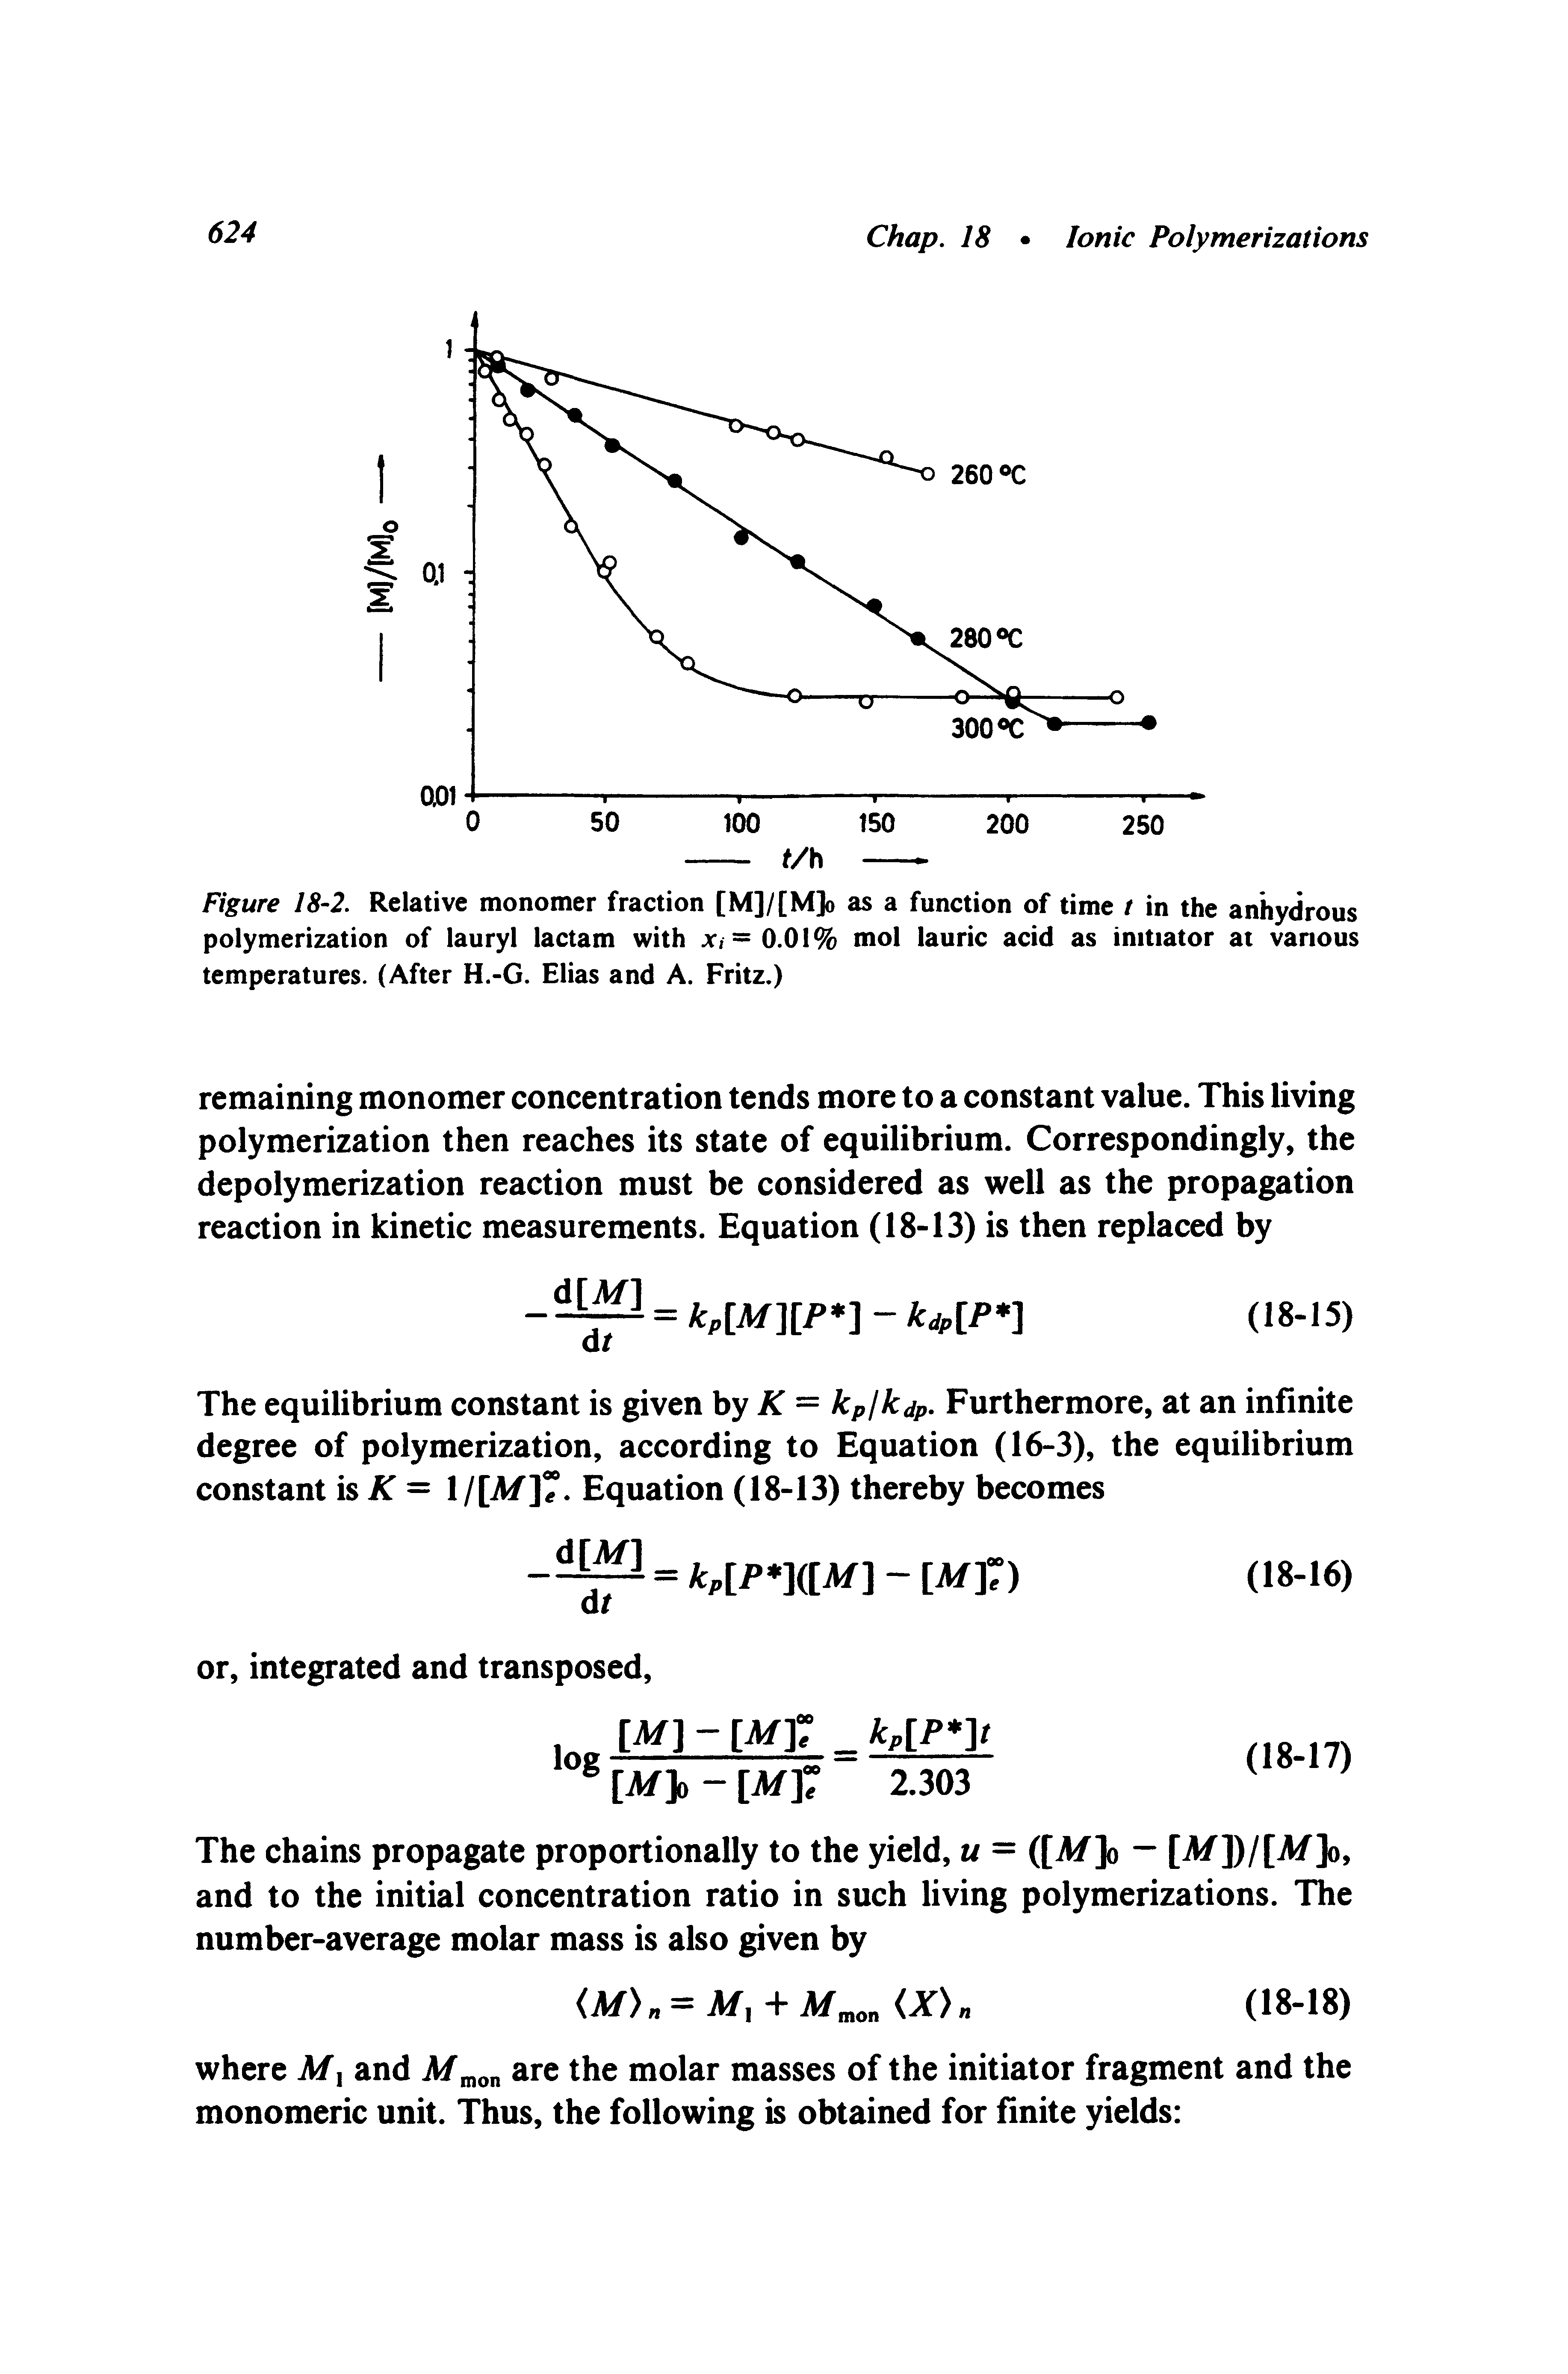 Figure 18-2. Relative monomer fraction [M]/[M]o as a function of time / in the anhydrous polymerization of lauryl lactam with jci=0.01% mol lauric acid as initiator at vanous temperatures. (After H.-G. Elias and A. Fritz.)...